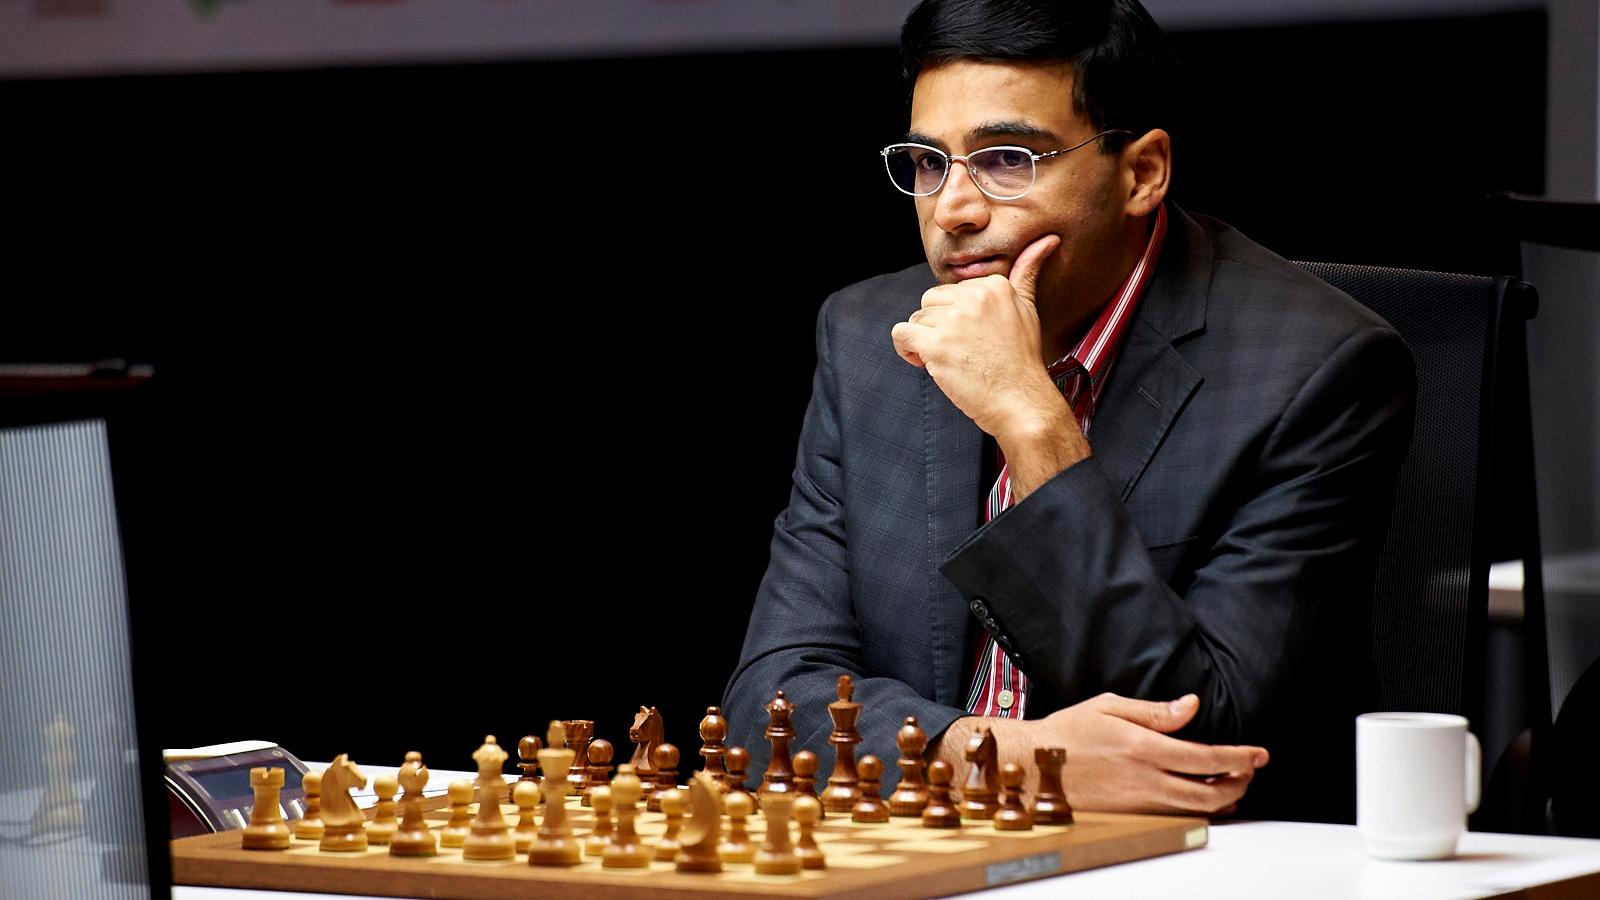 Anand to play first onboard game in Croatia Grand Chess Tour The